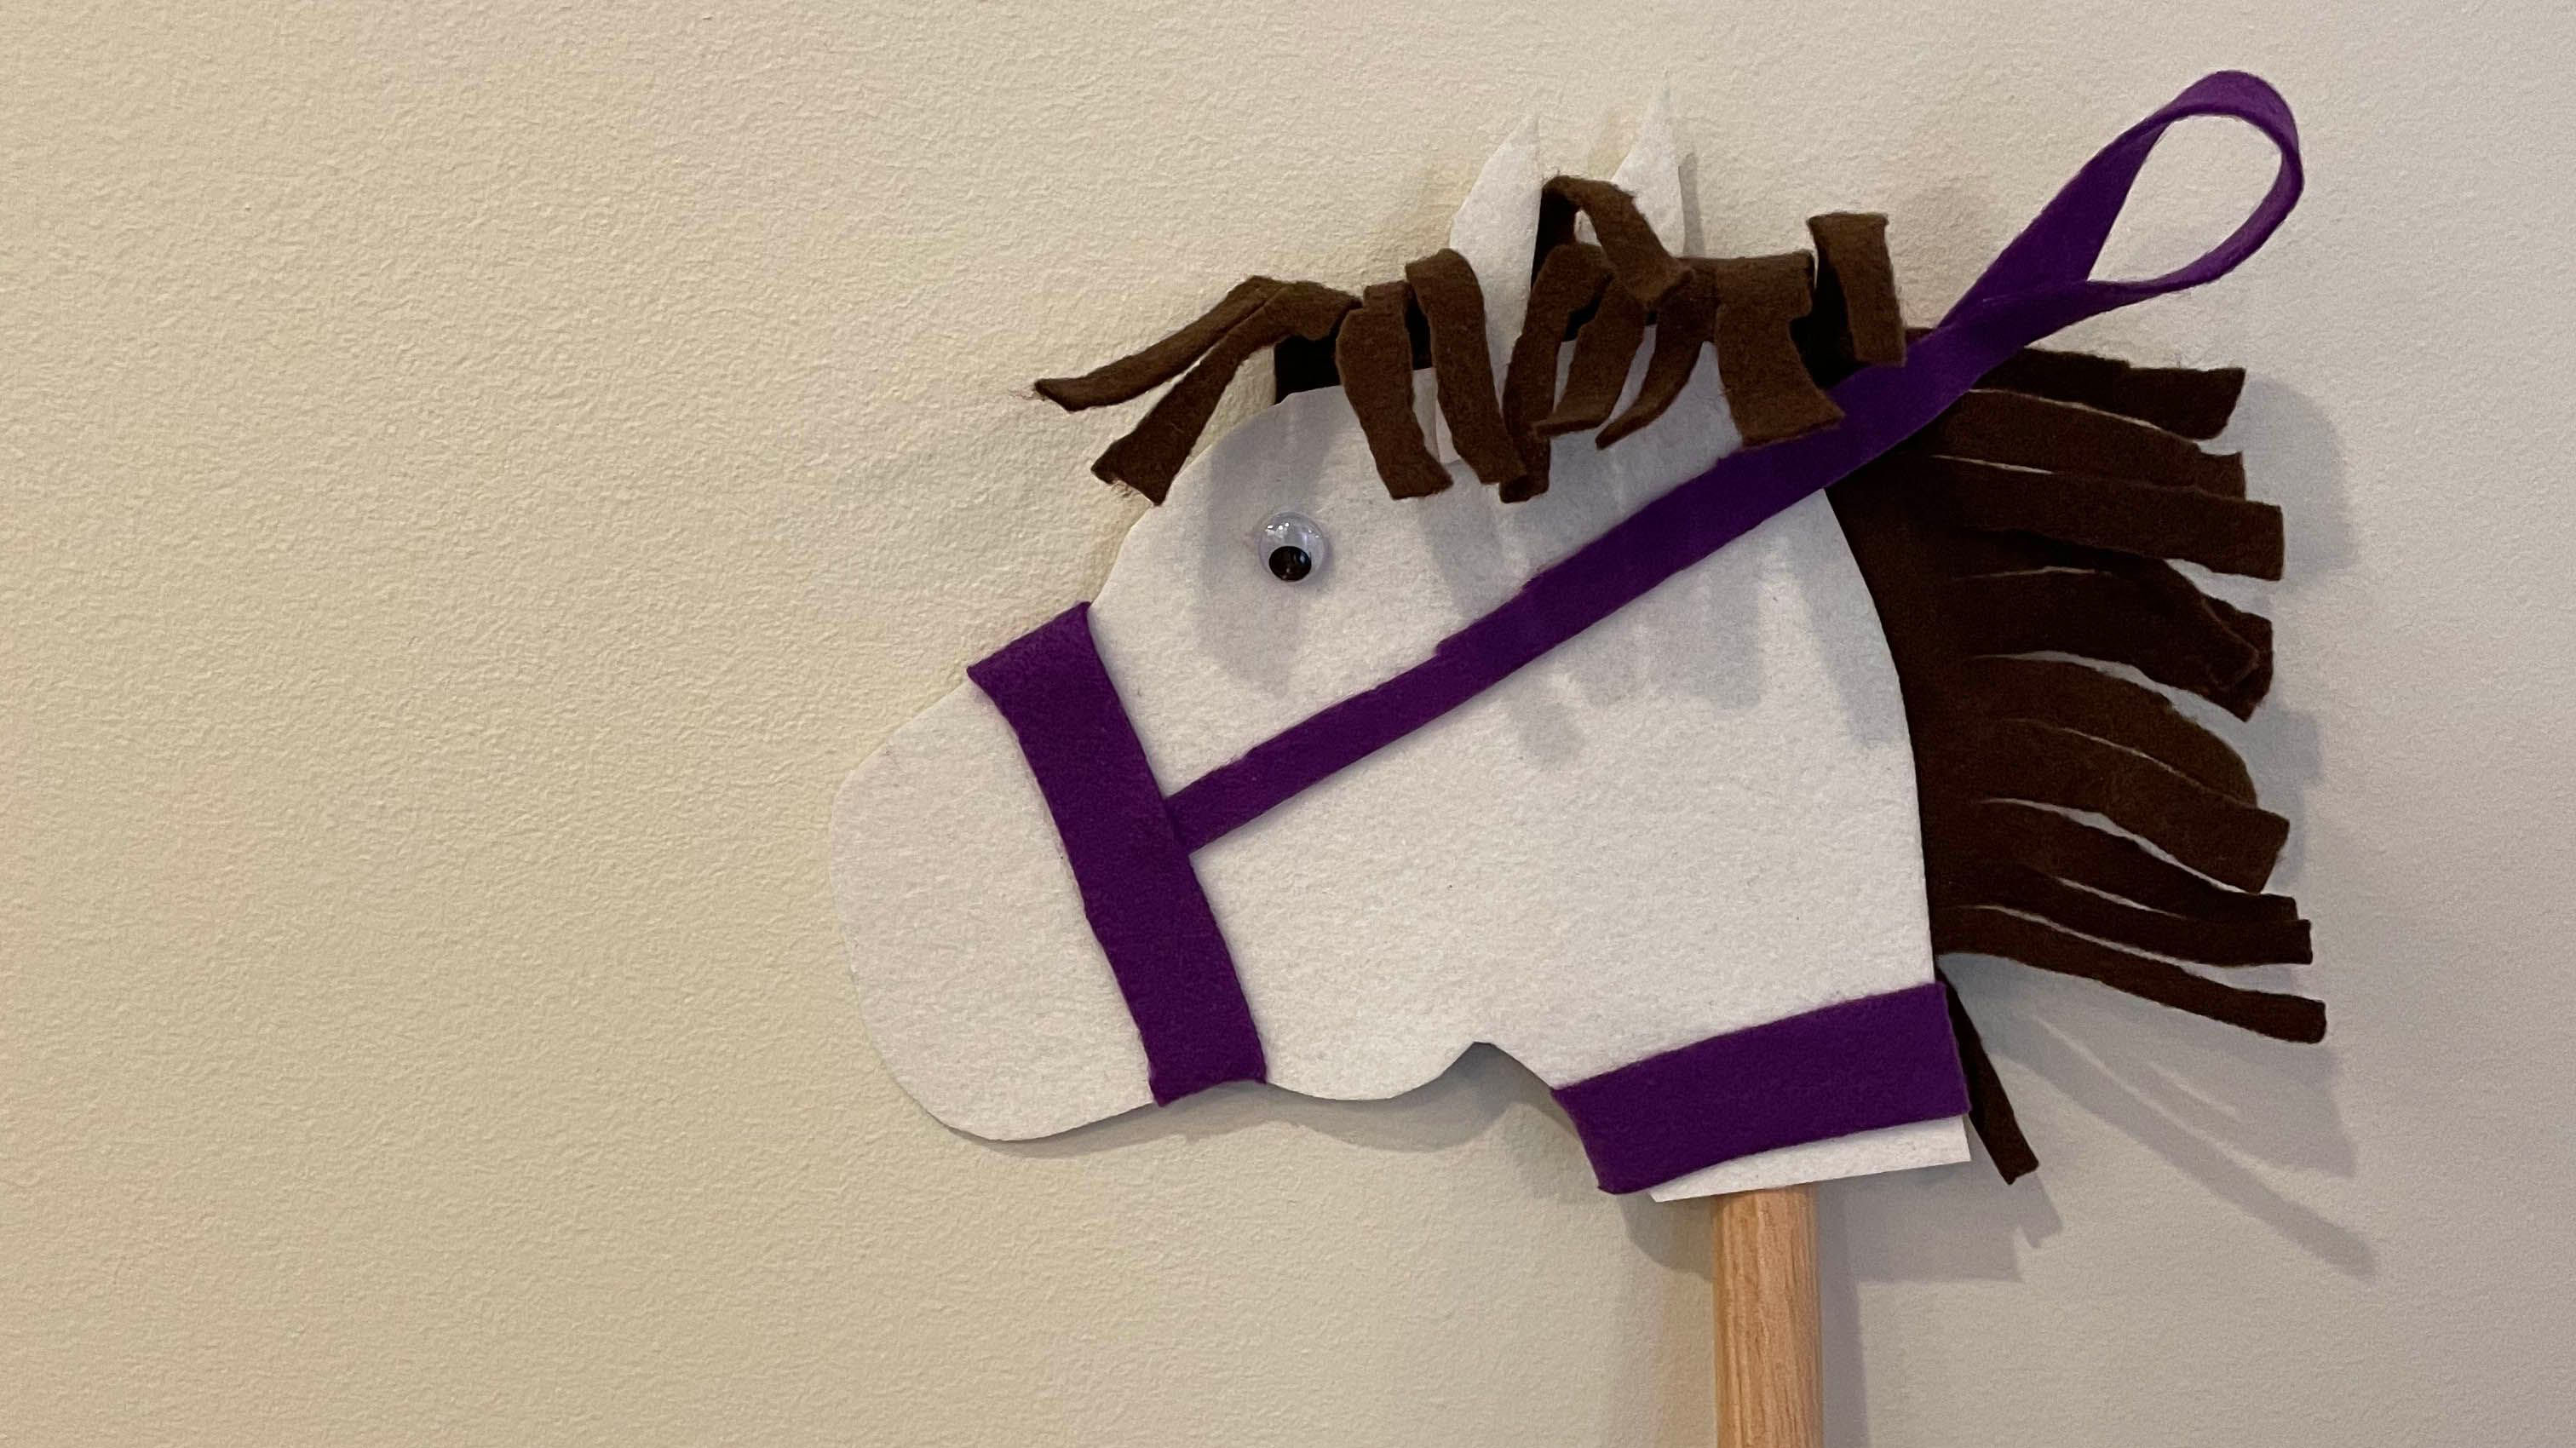 White, purple and black felt pieces shaped as a horse attached to stick